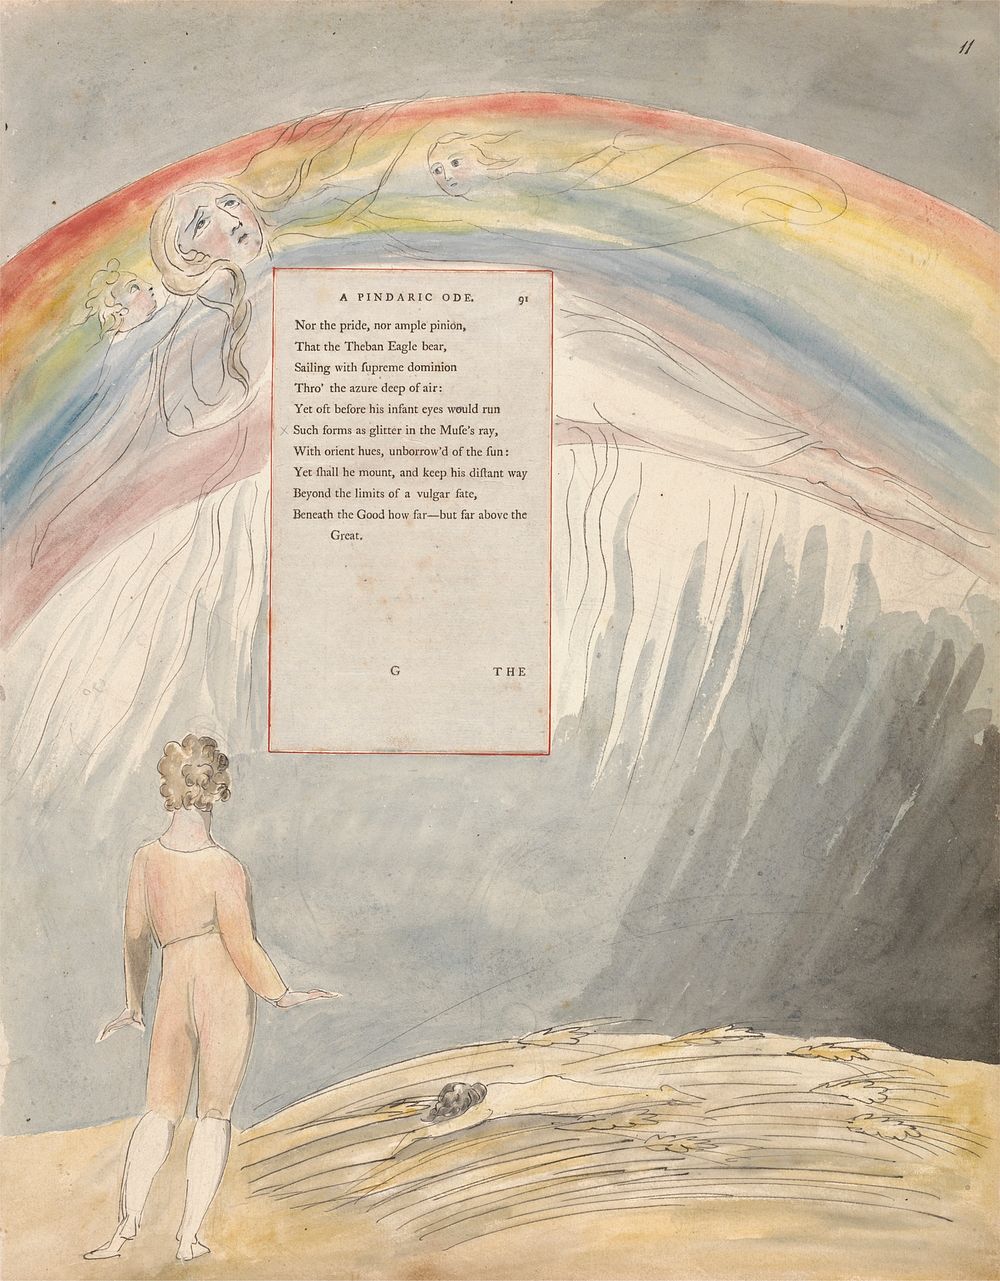 The Poems of Thomas Gray, Design 51, "The Progress of Poesy." by William Blake. Original public domain image from Yale…